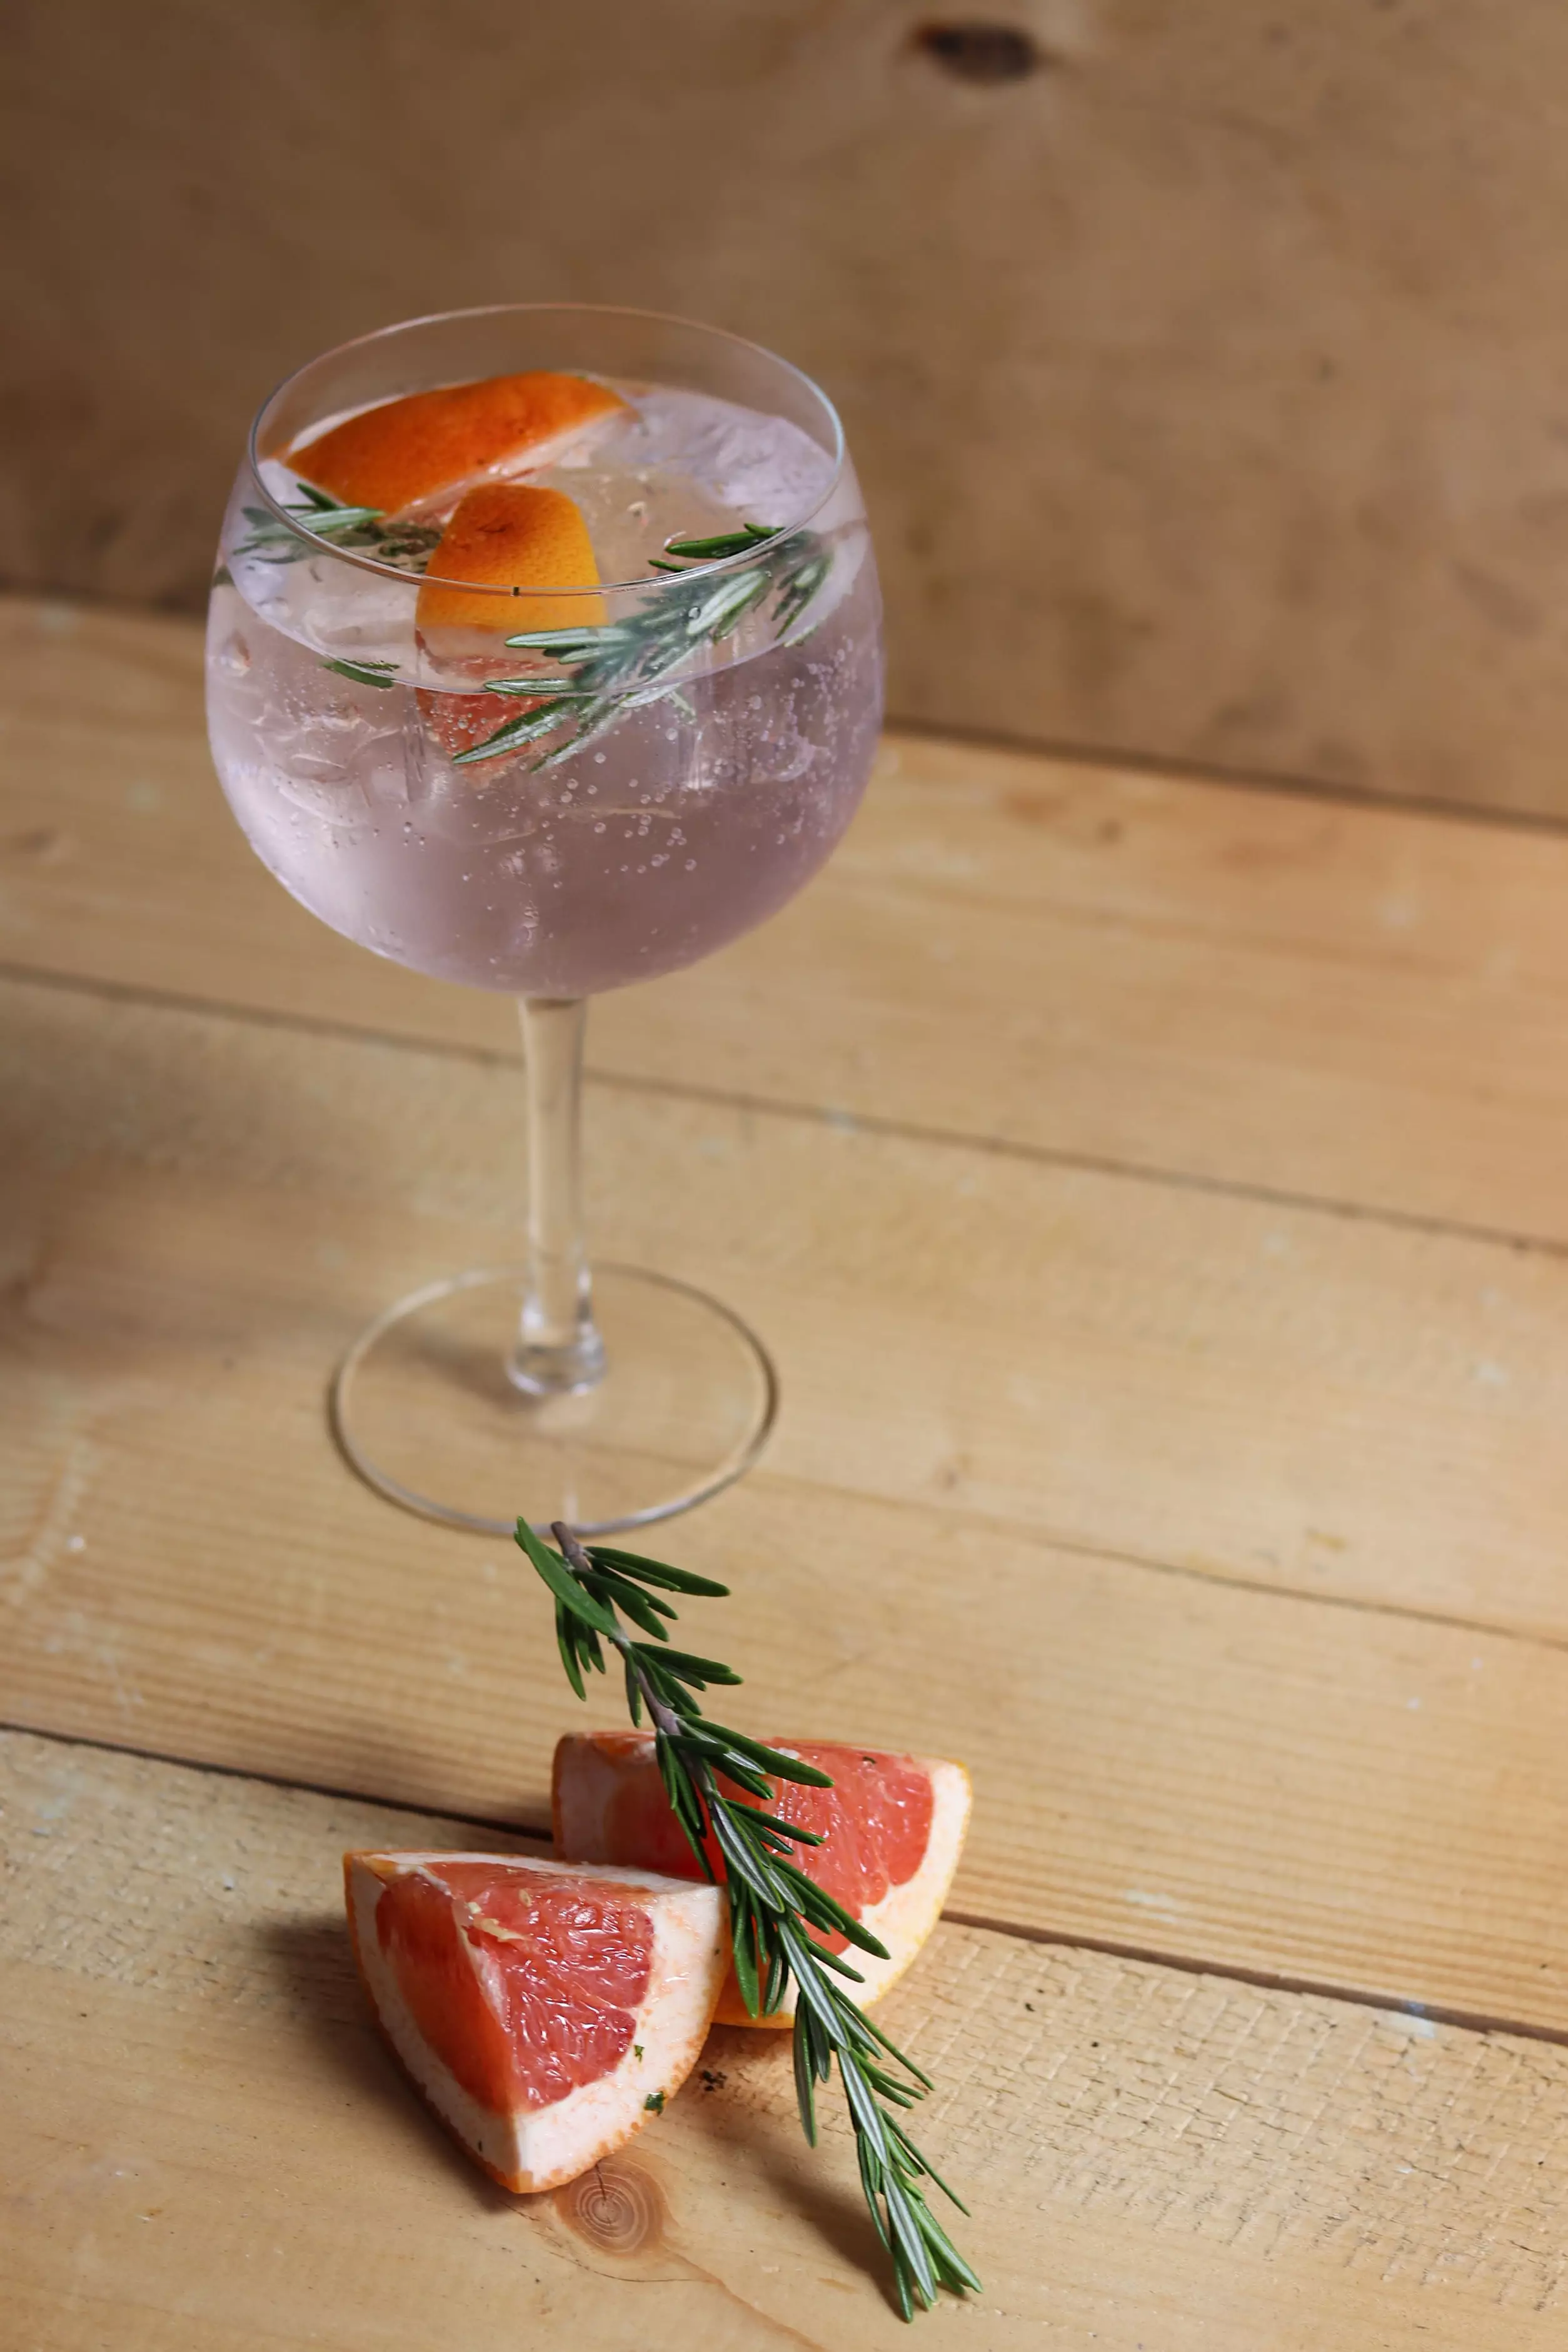 Alcohol-free gin is perfect for dry Jan (